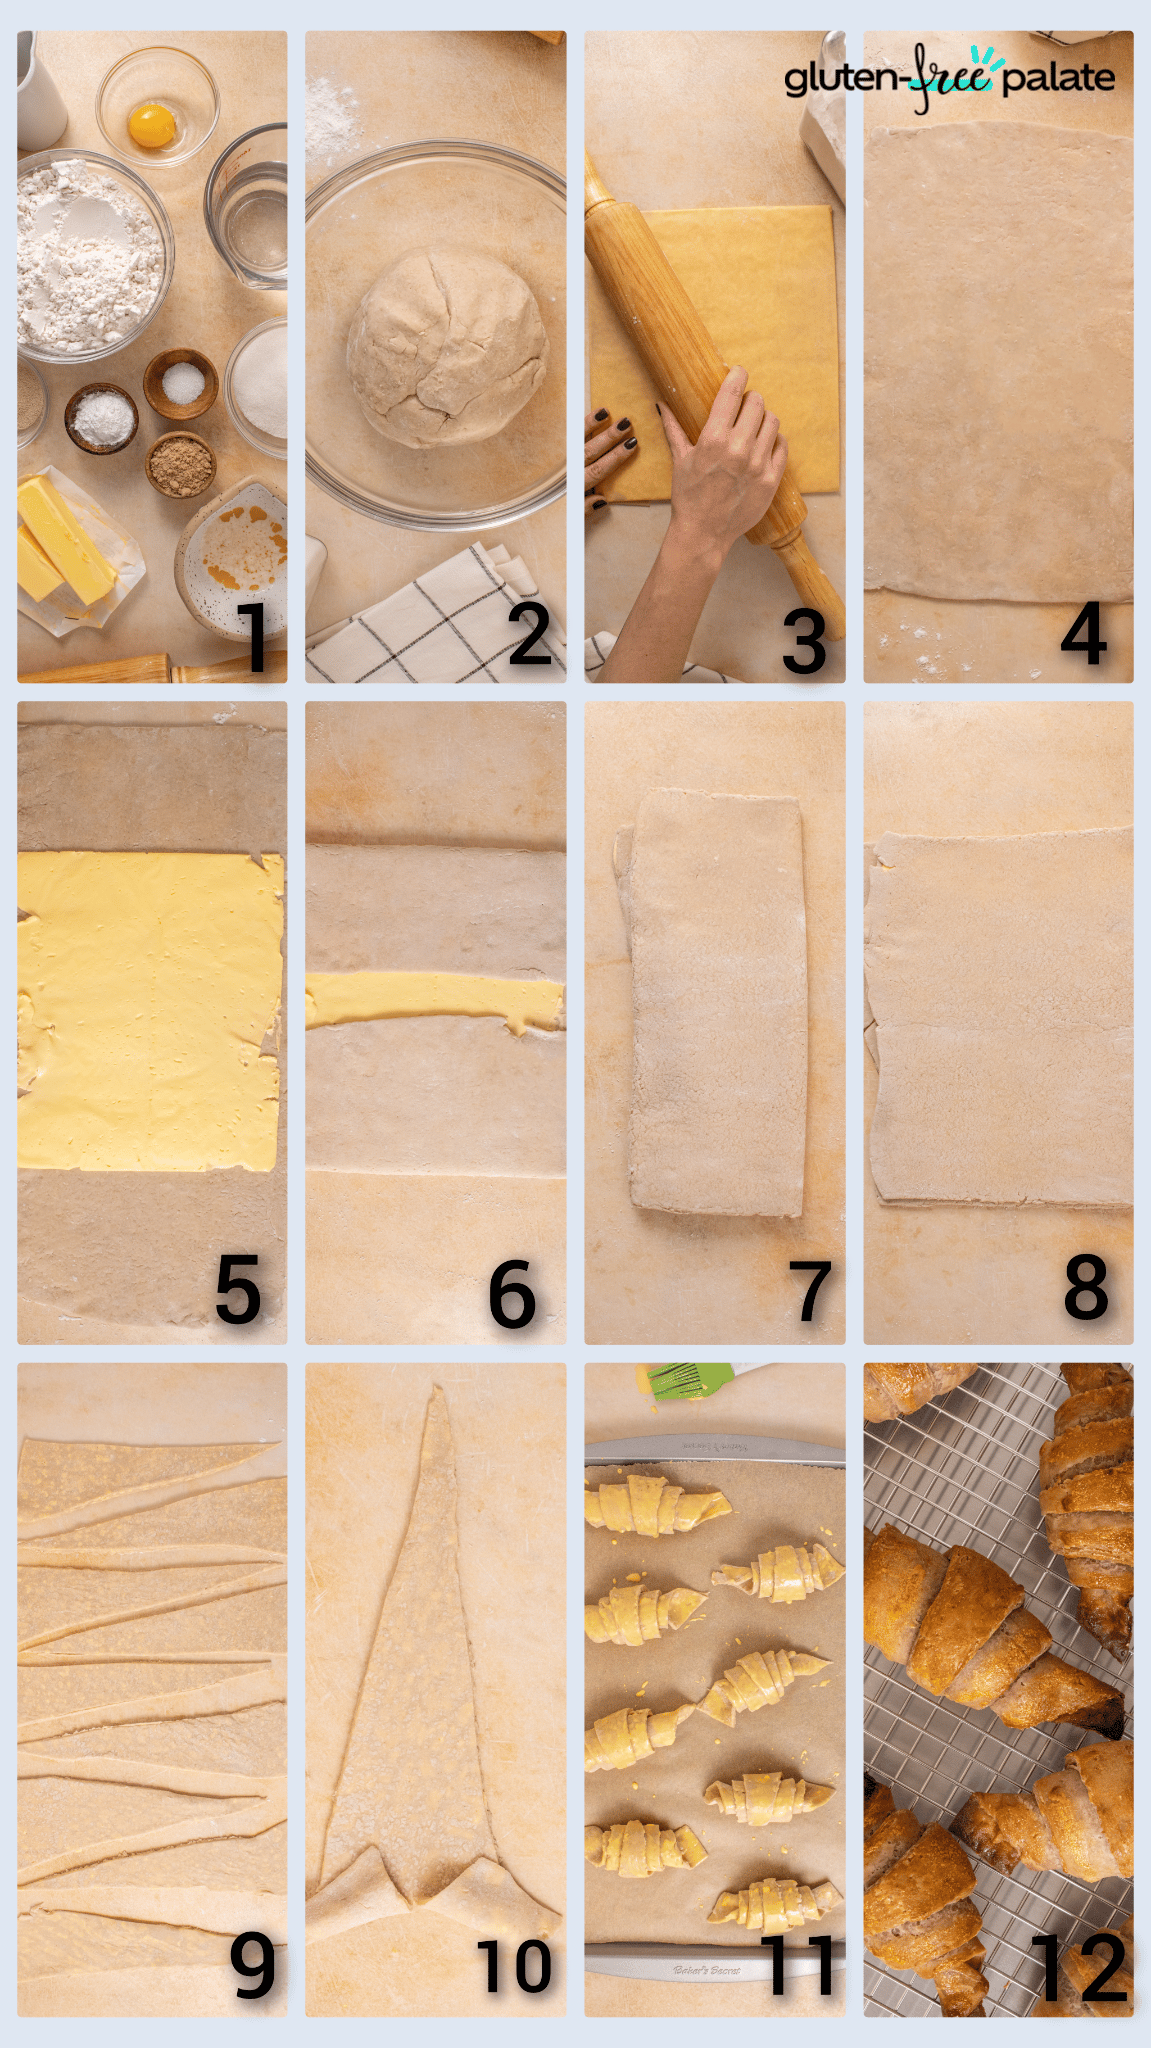 gluten-free croissant step by step